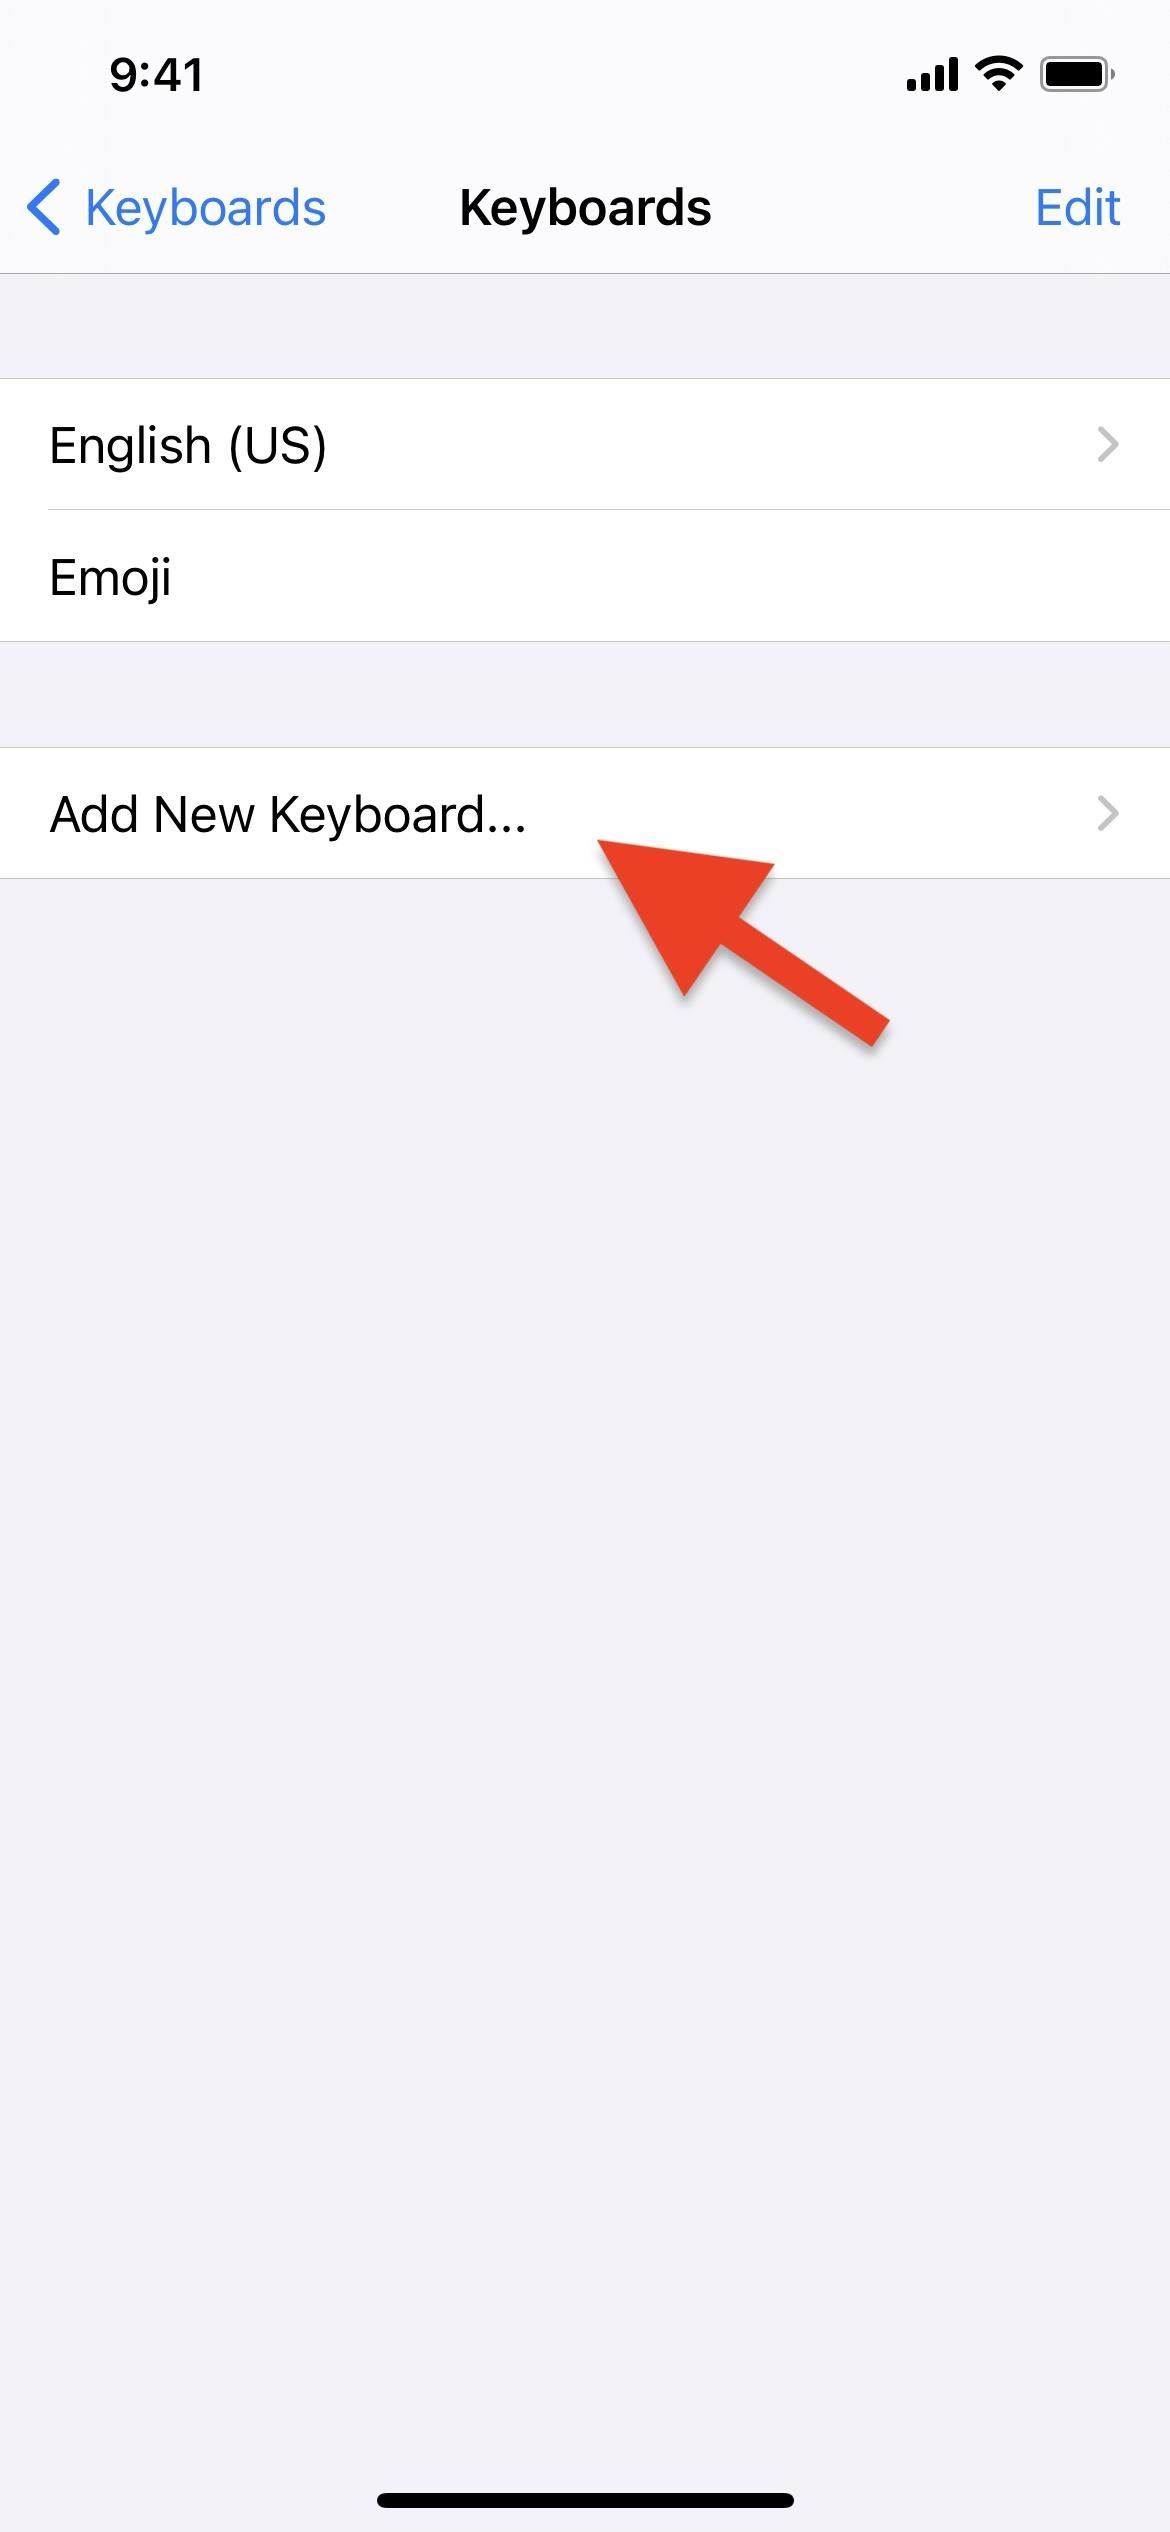 How to Unlock the Secret Emoticon Keyboard on Your iPhone